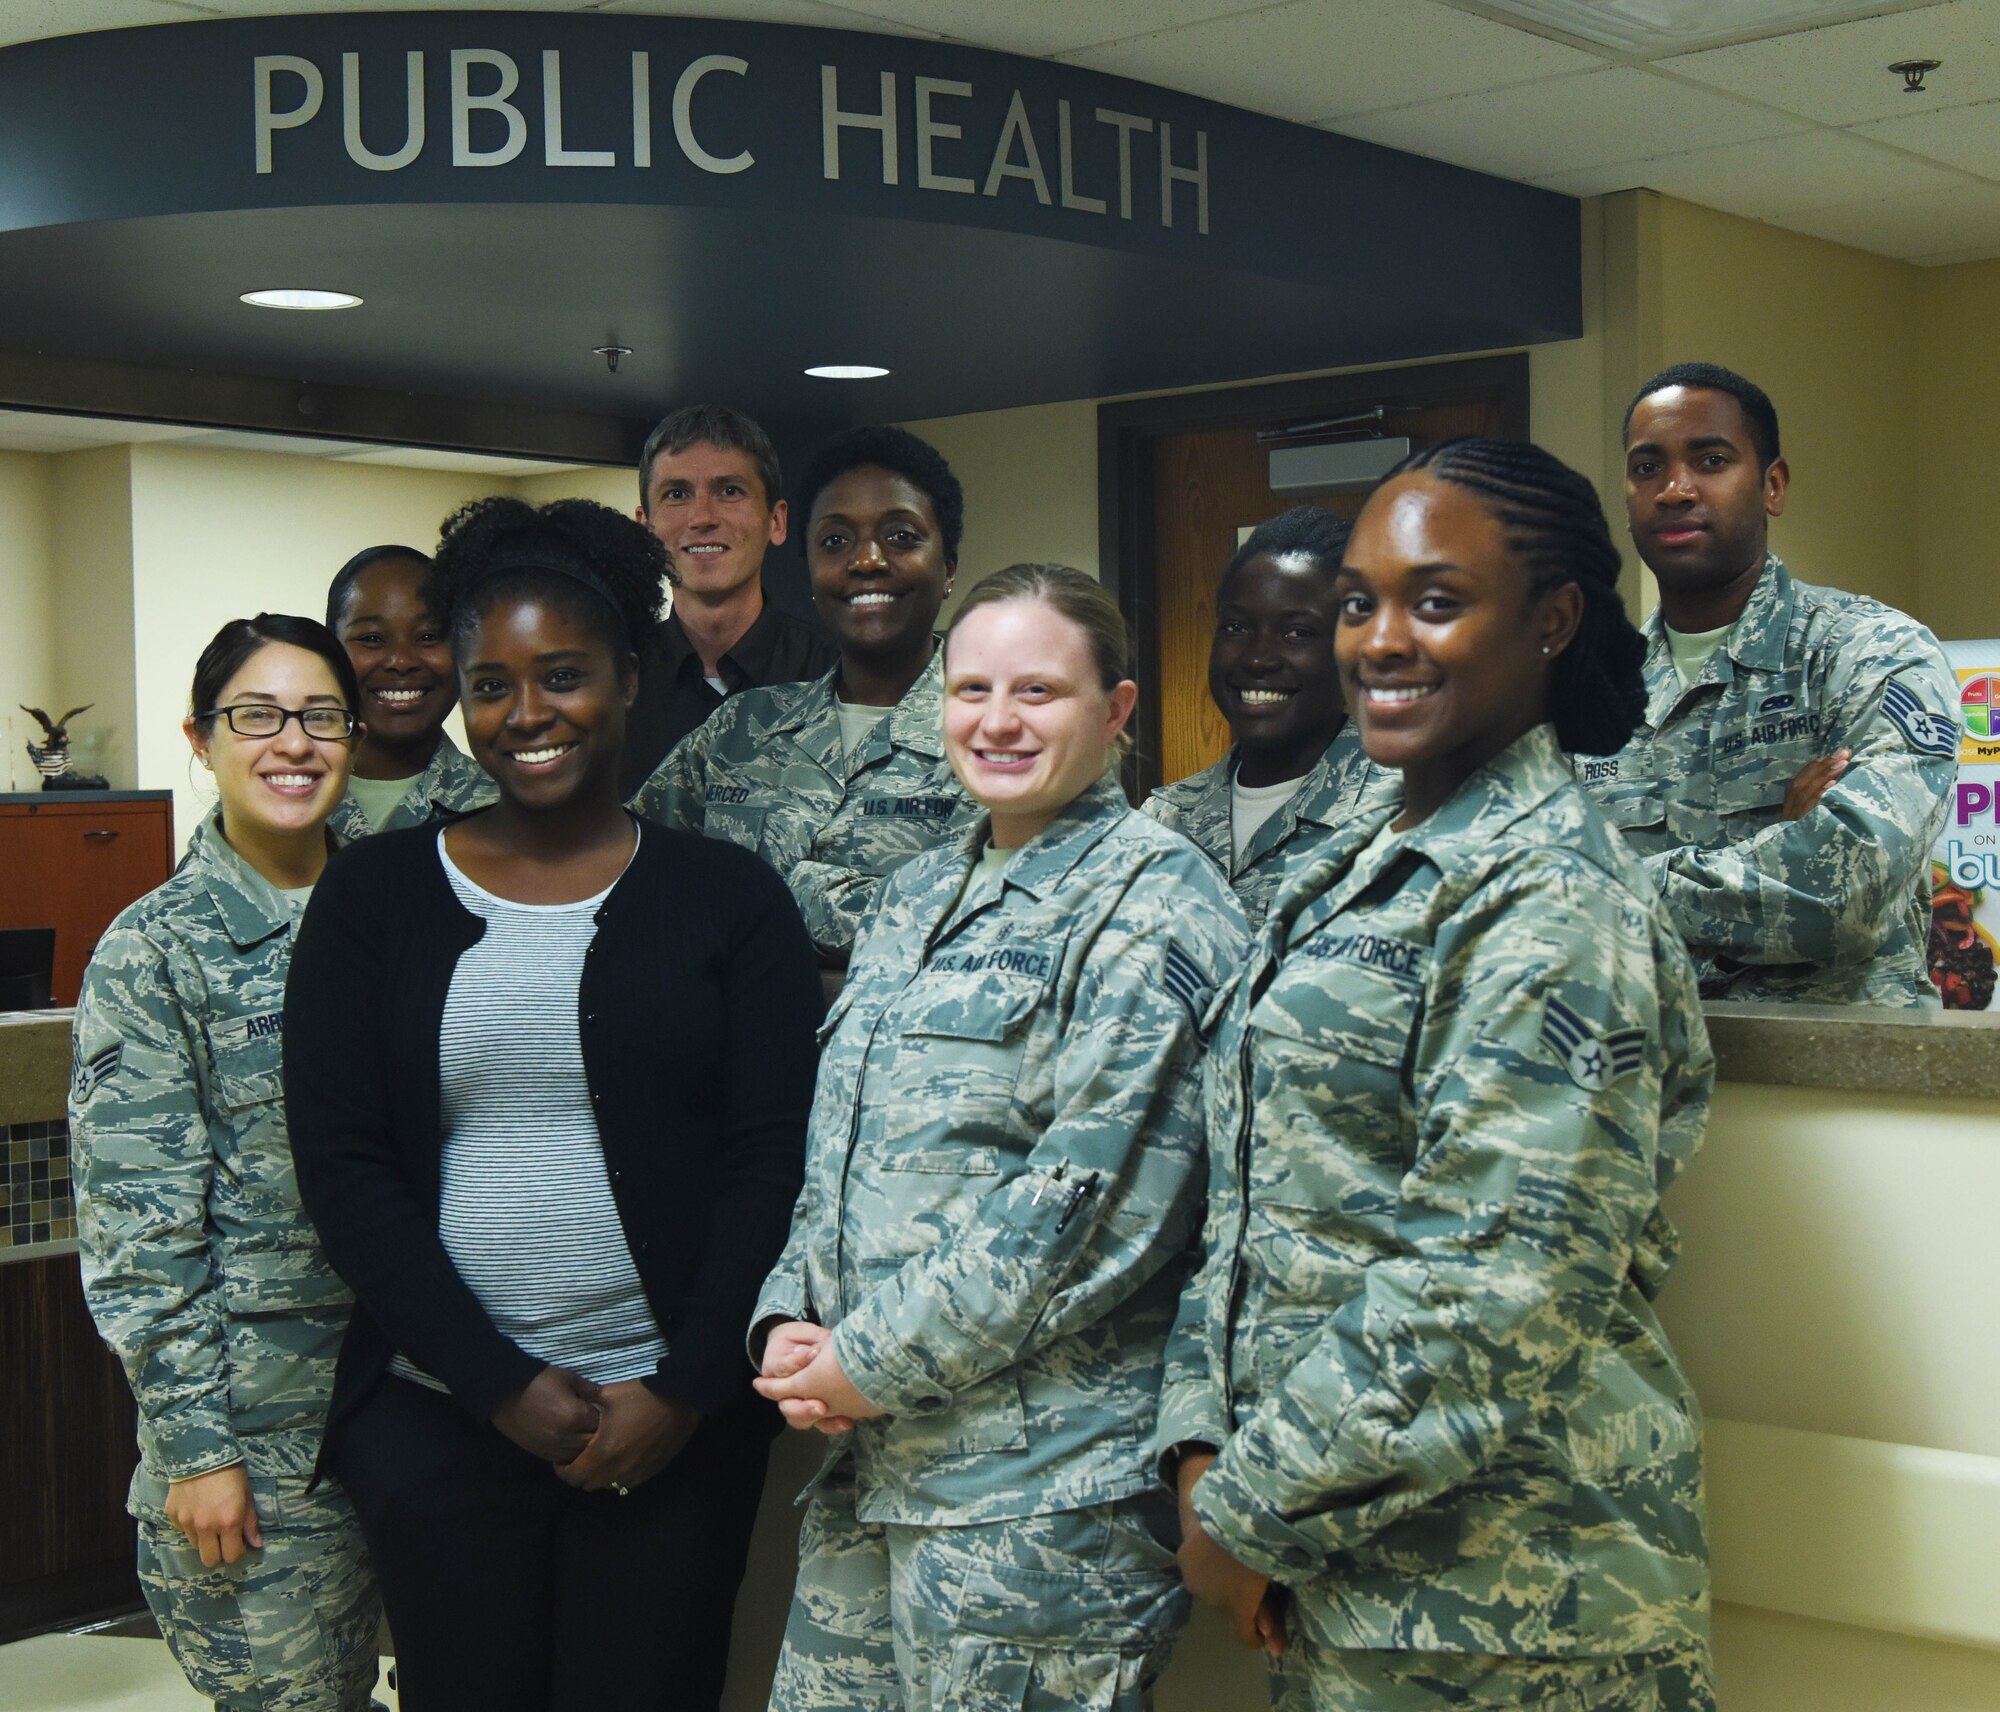 Members assigned to the 28th Medical Group public health flight stand in front of their office at Ellsworth Air Force Base, S.D., Aug. 28, 2018. The public health flight continuously captures local mosquito samples that are sent out and analyzed for diseases by the U.S. Air Force School of Aerospace Medicine at Wright-Patterson AFB, Ohio. (U.S. Air Force photo by Airman 1st Class Thomas Karol)